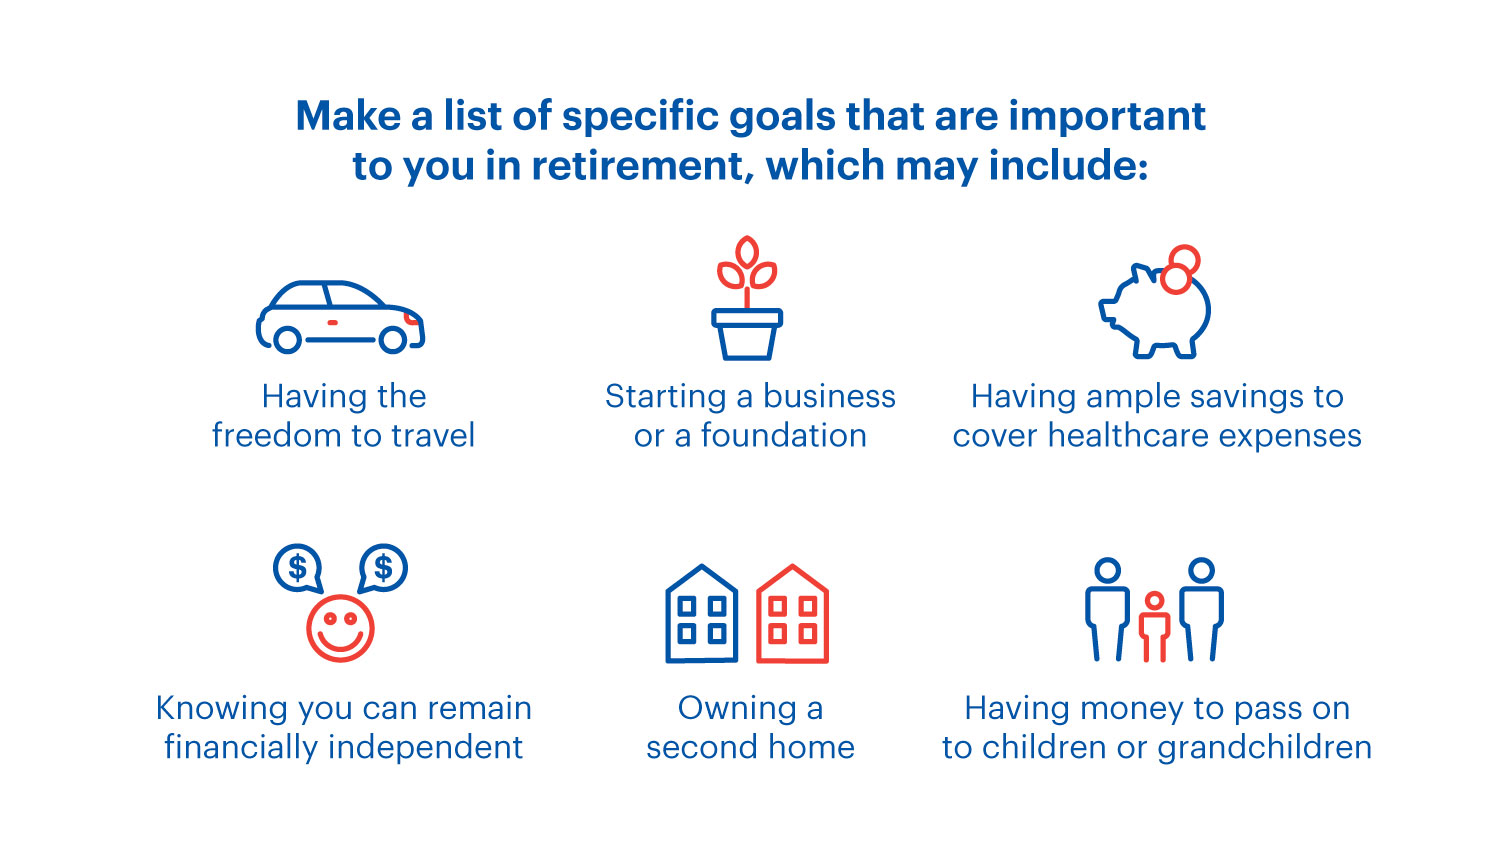 An infographic explaining good goals to have for retirement.